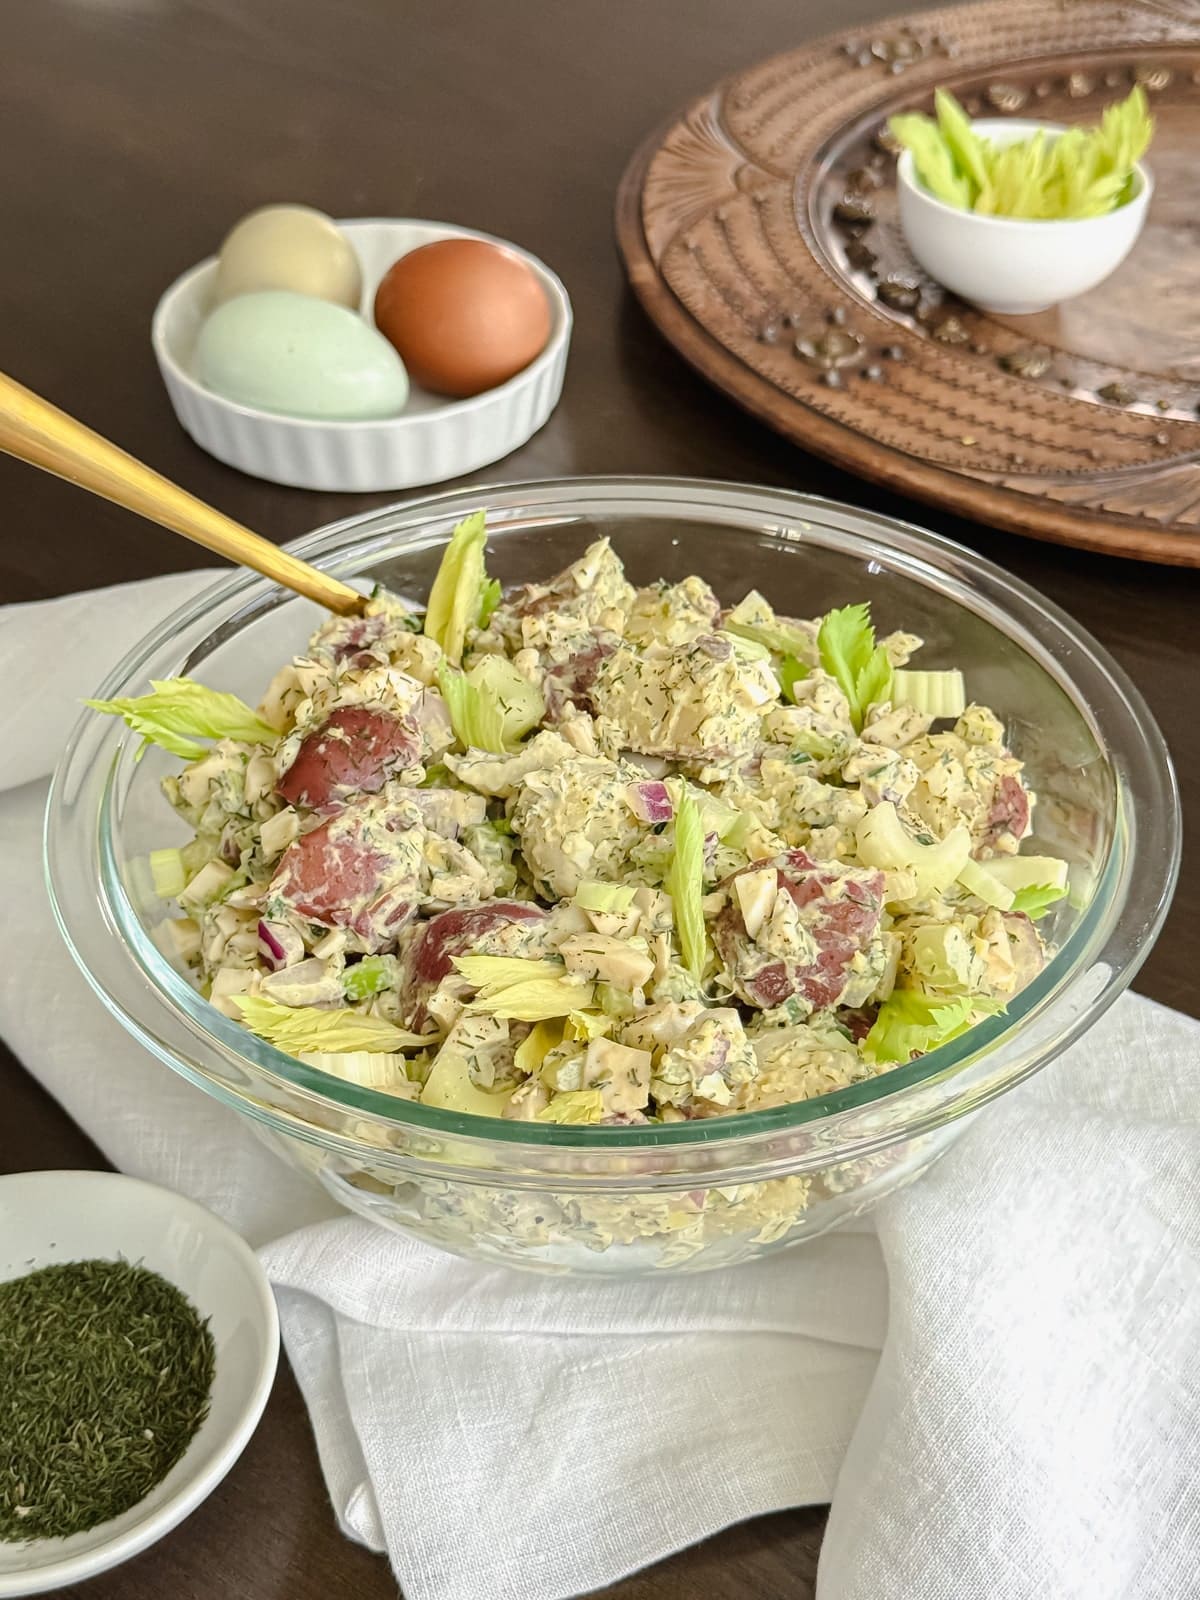 A bowl of chunky potato salad with eggs and celery leaves.